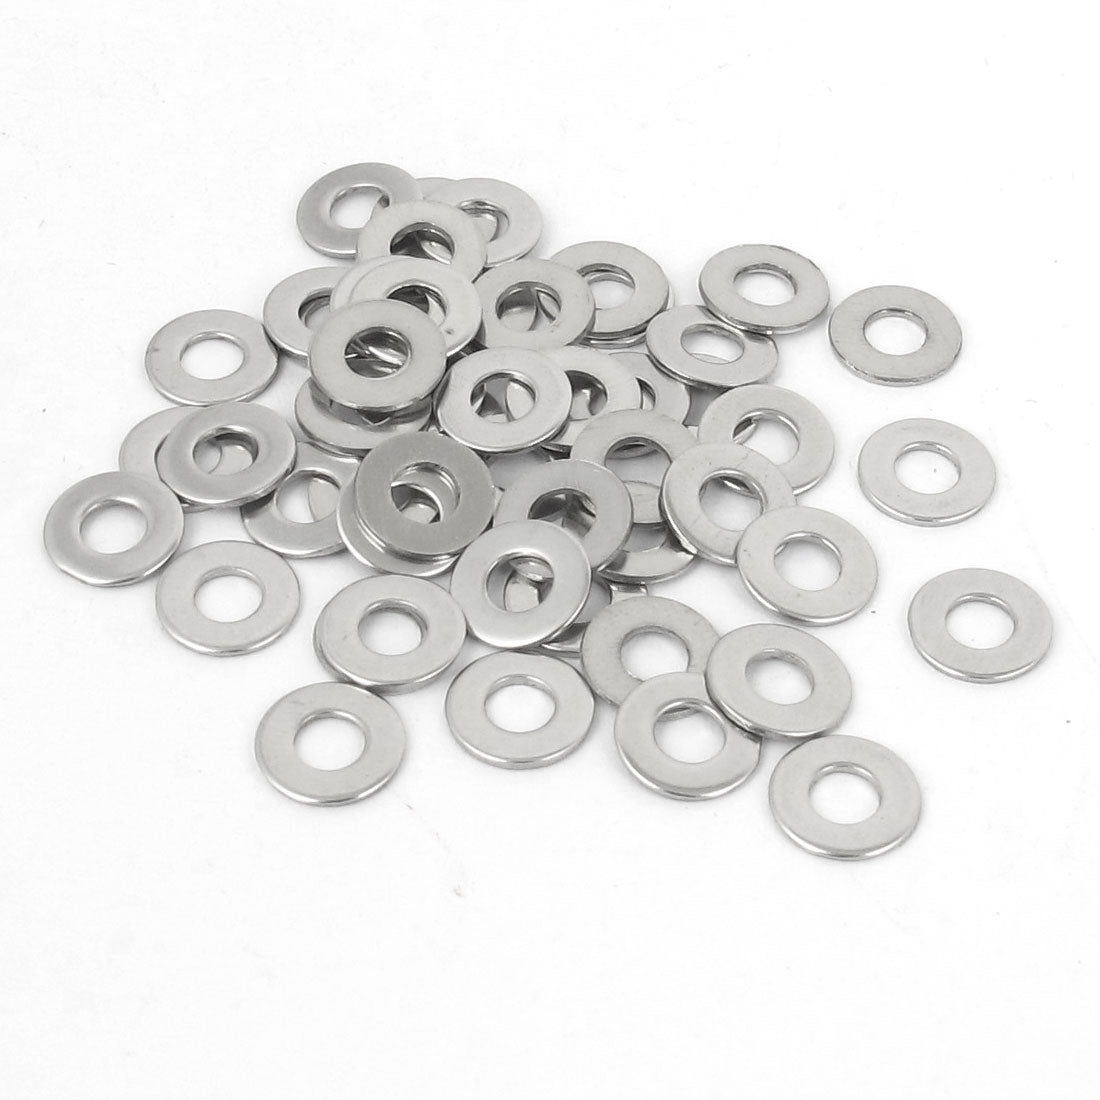 uxcell Uxcell 50pcs M3 Stainless Steel Flat Washer Plain Spacer Gasket for Screw Bolt